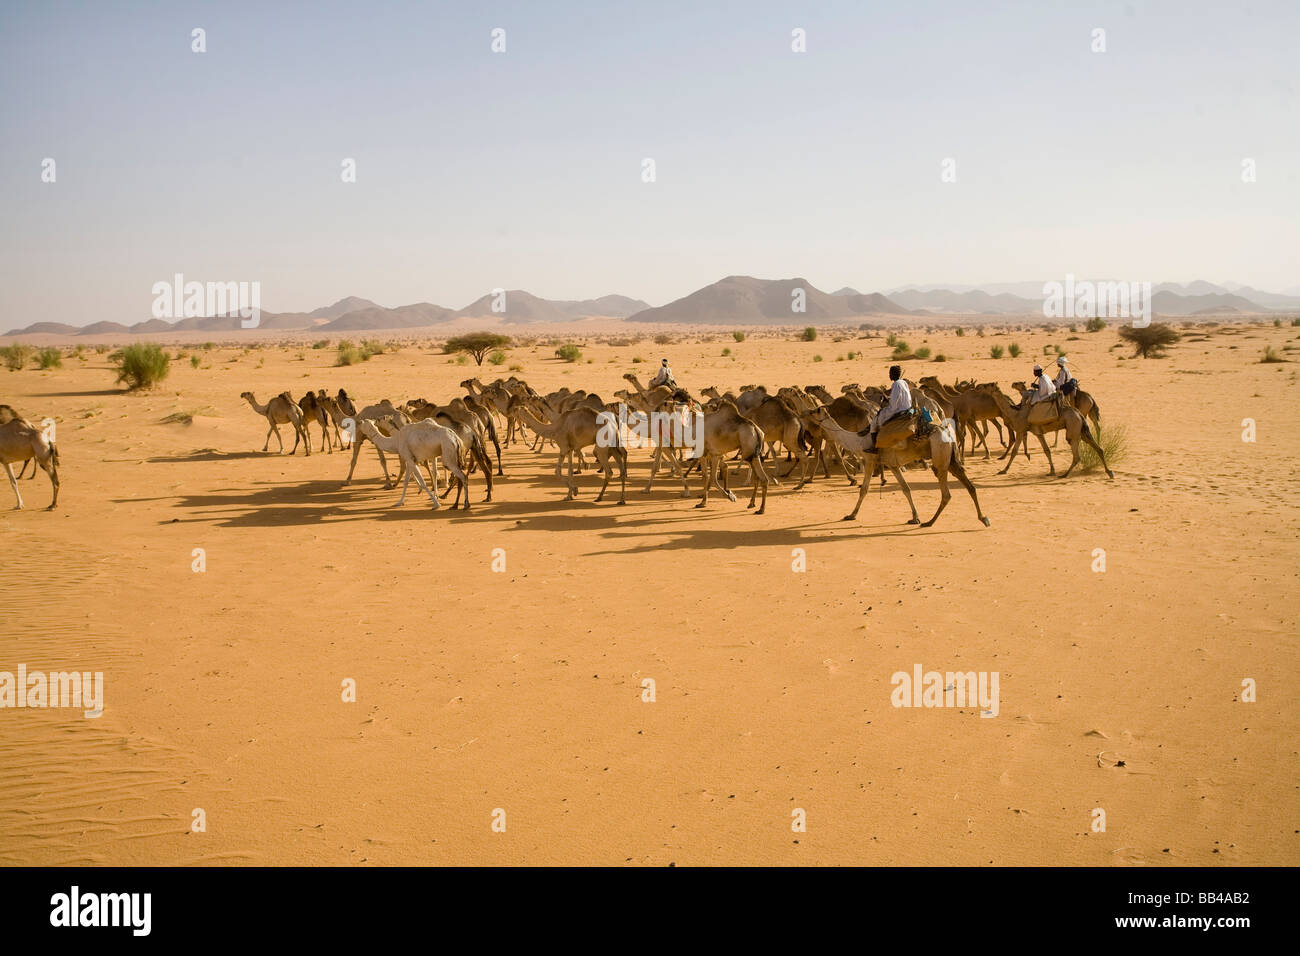 A camel caravan travels through the Sahara Desert, Sudan.150,000 camels travel from Sudanto Egypt yearly to be sold. Stock Photo